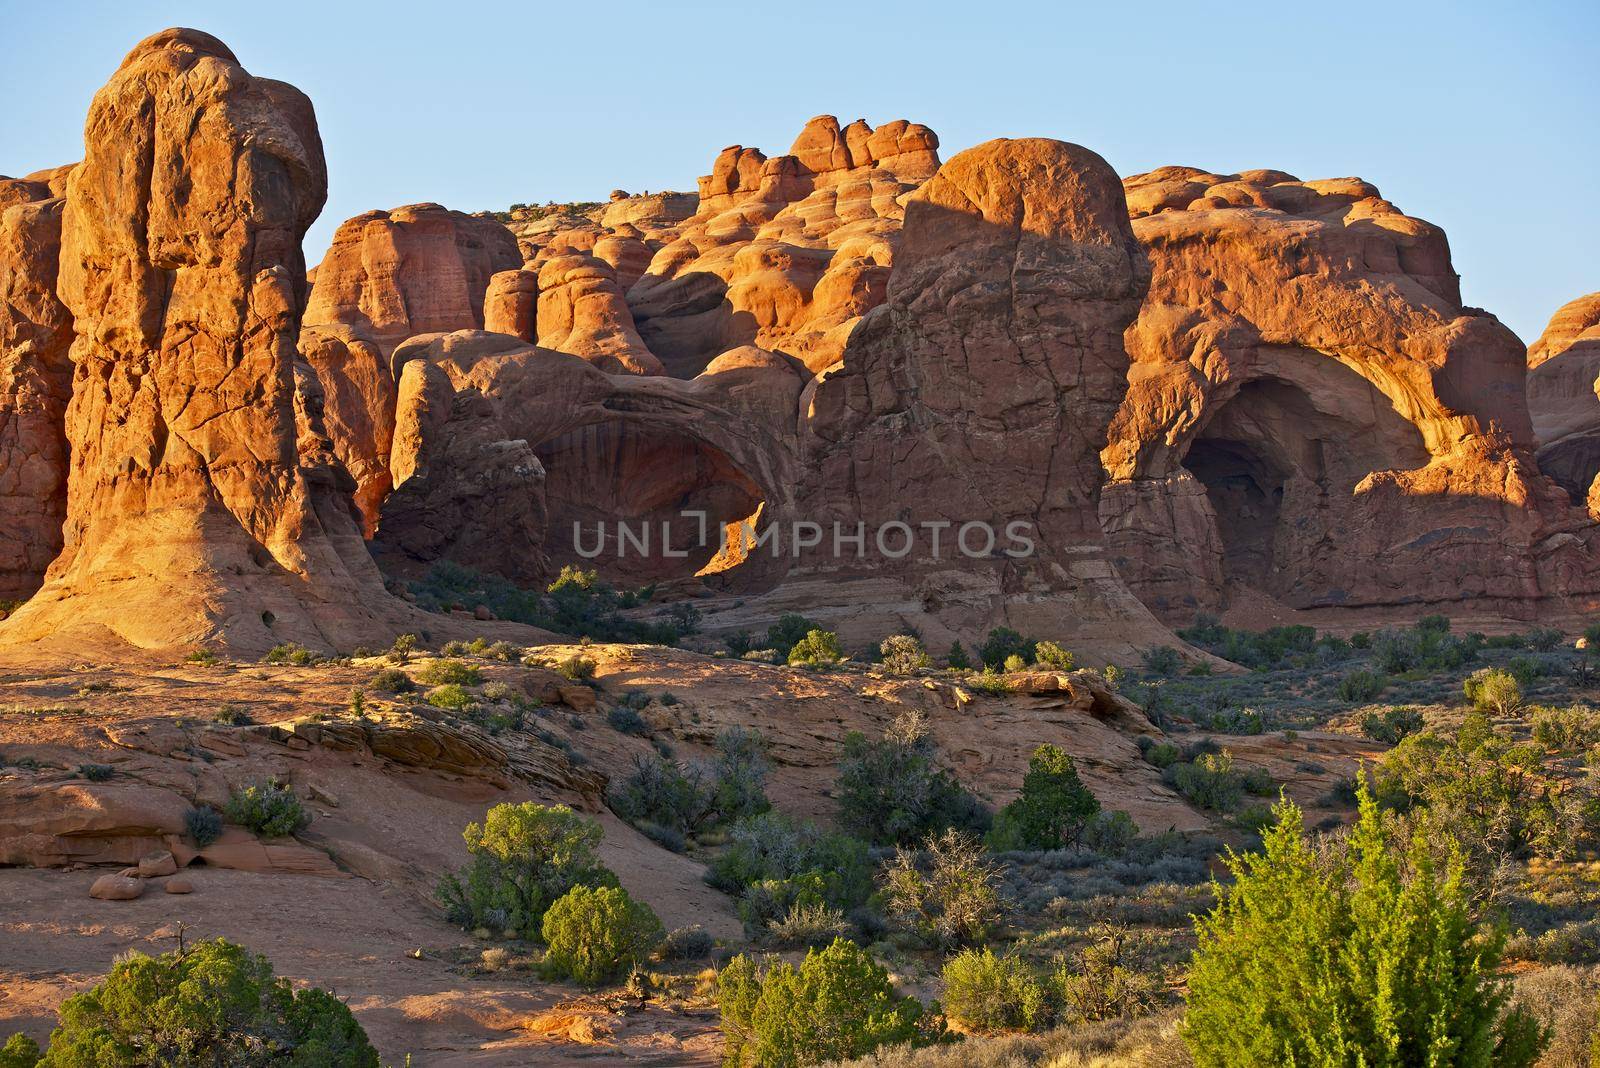 Arches National Park Utah, U.S.A. Arches Park Amazing Rocky Landscape. Eroded Red Sandstones. Travel Photo Collection by welcomia